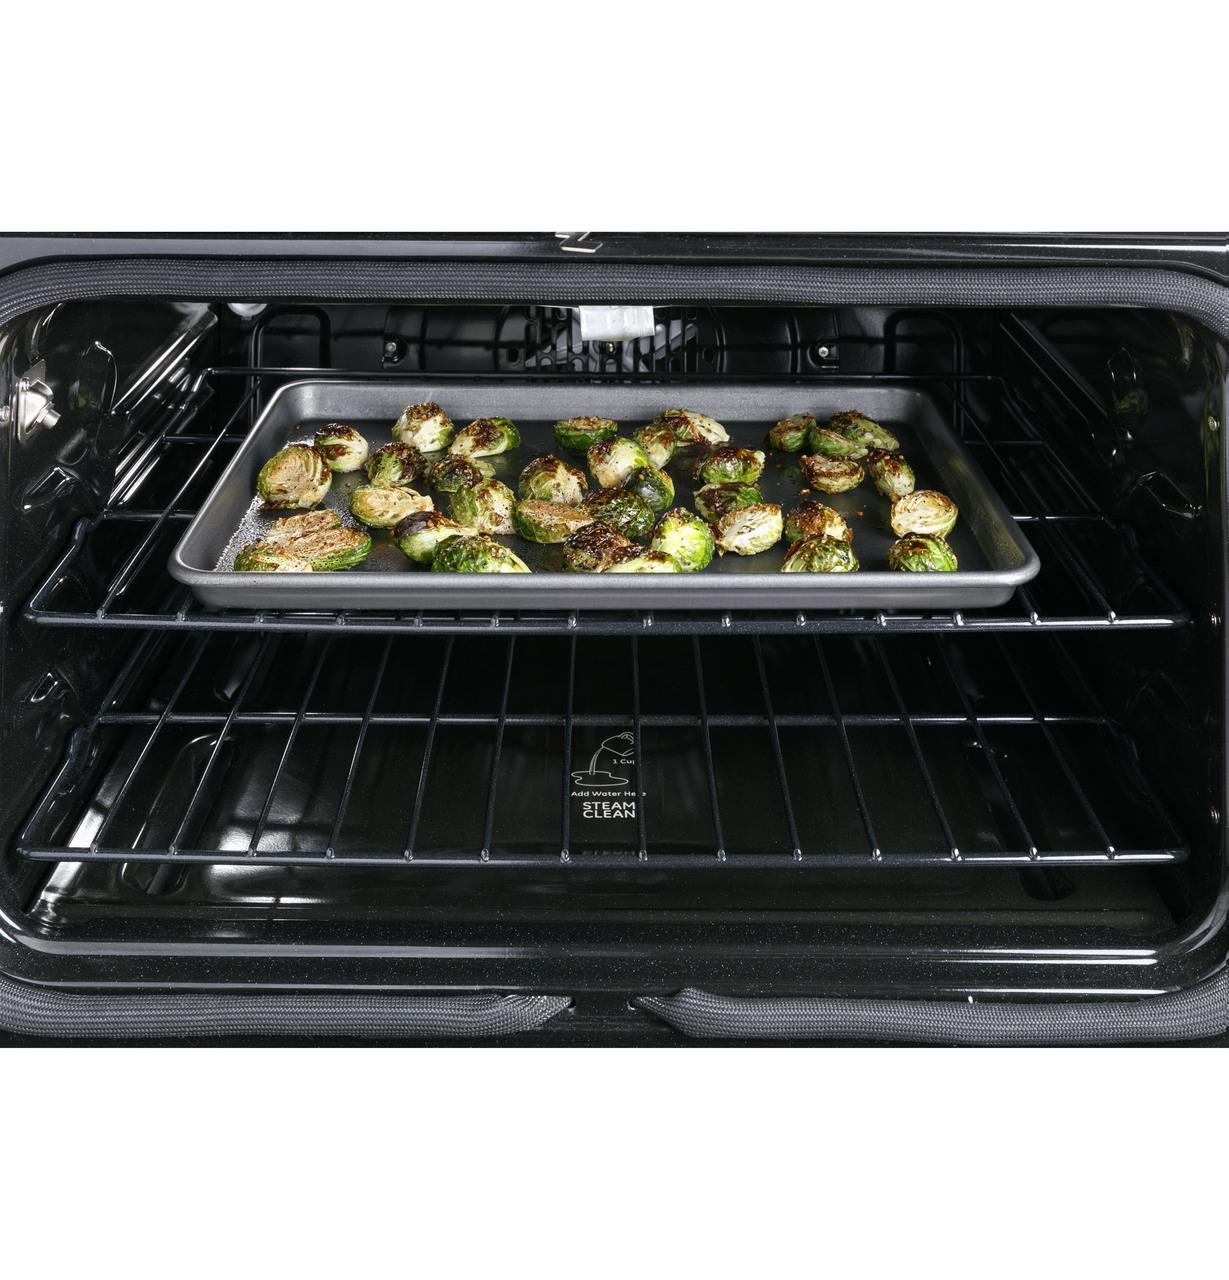 Caf(eback)™ 30" Smart Free-Standing Gas Range with Convection